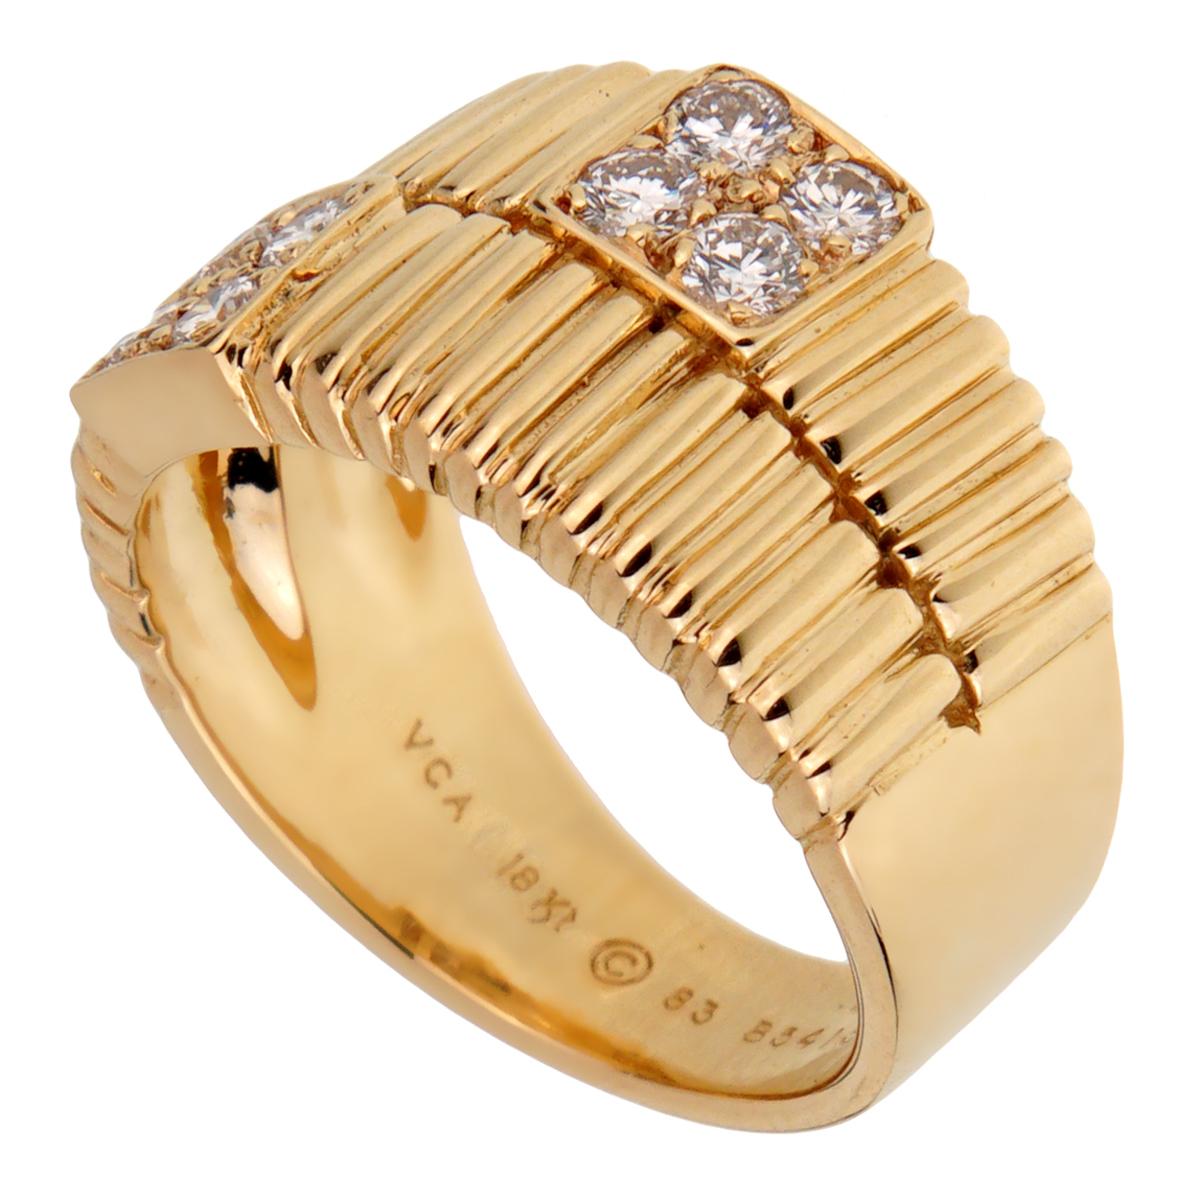 A chic Van Cleef & Arpels vintage diamond ring circa 1990s showcasing a ribbed pattern set with 8 round brilliant cut diamonds in 18k yellow gold.

Size 5 1/2